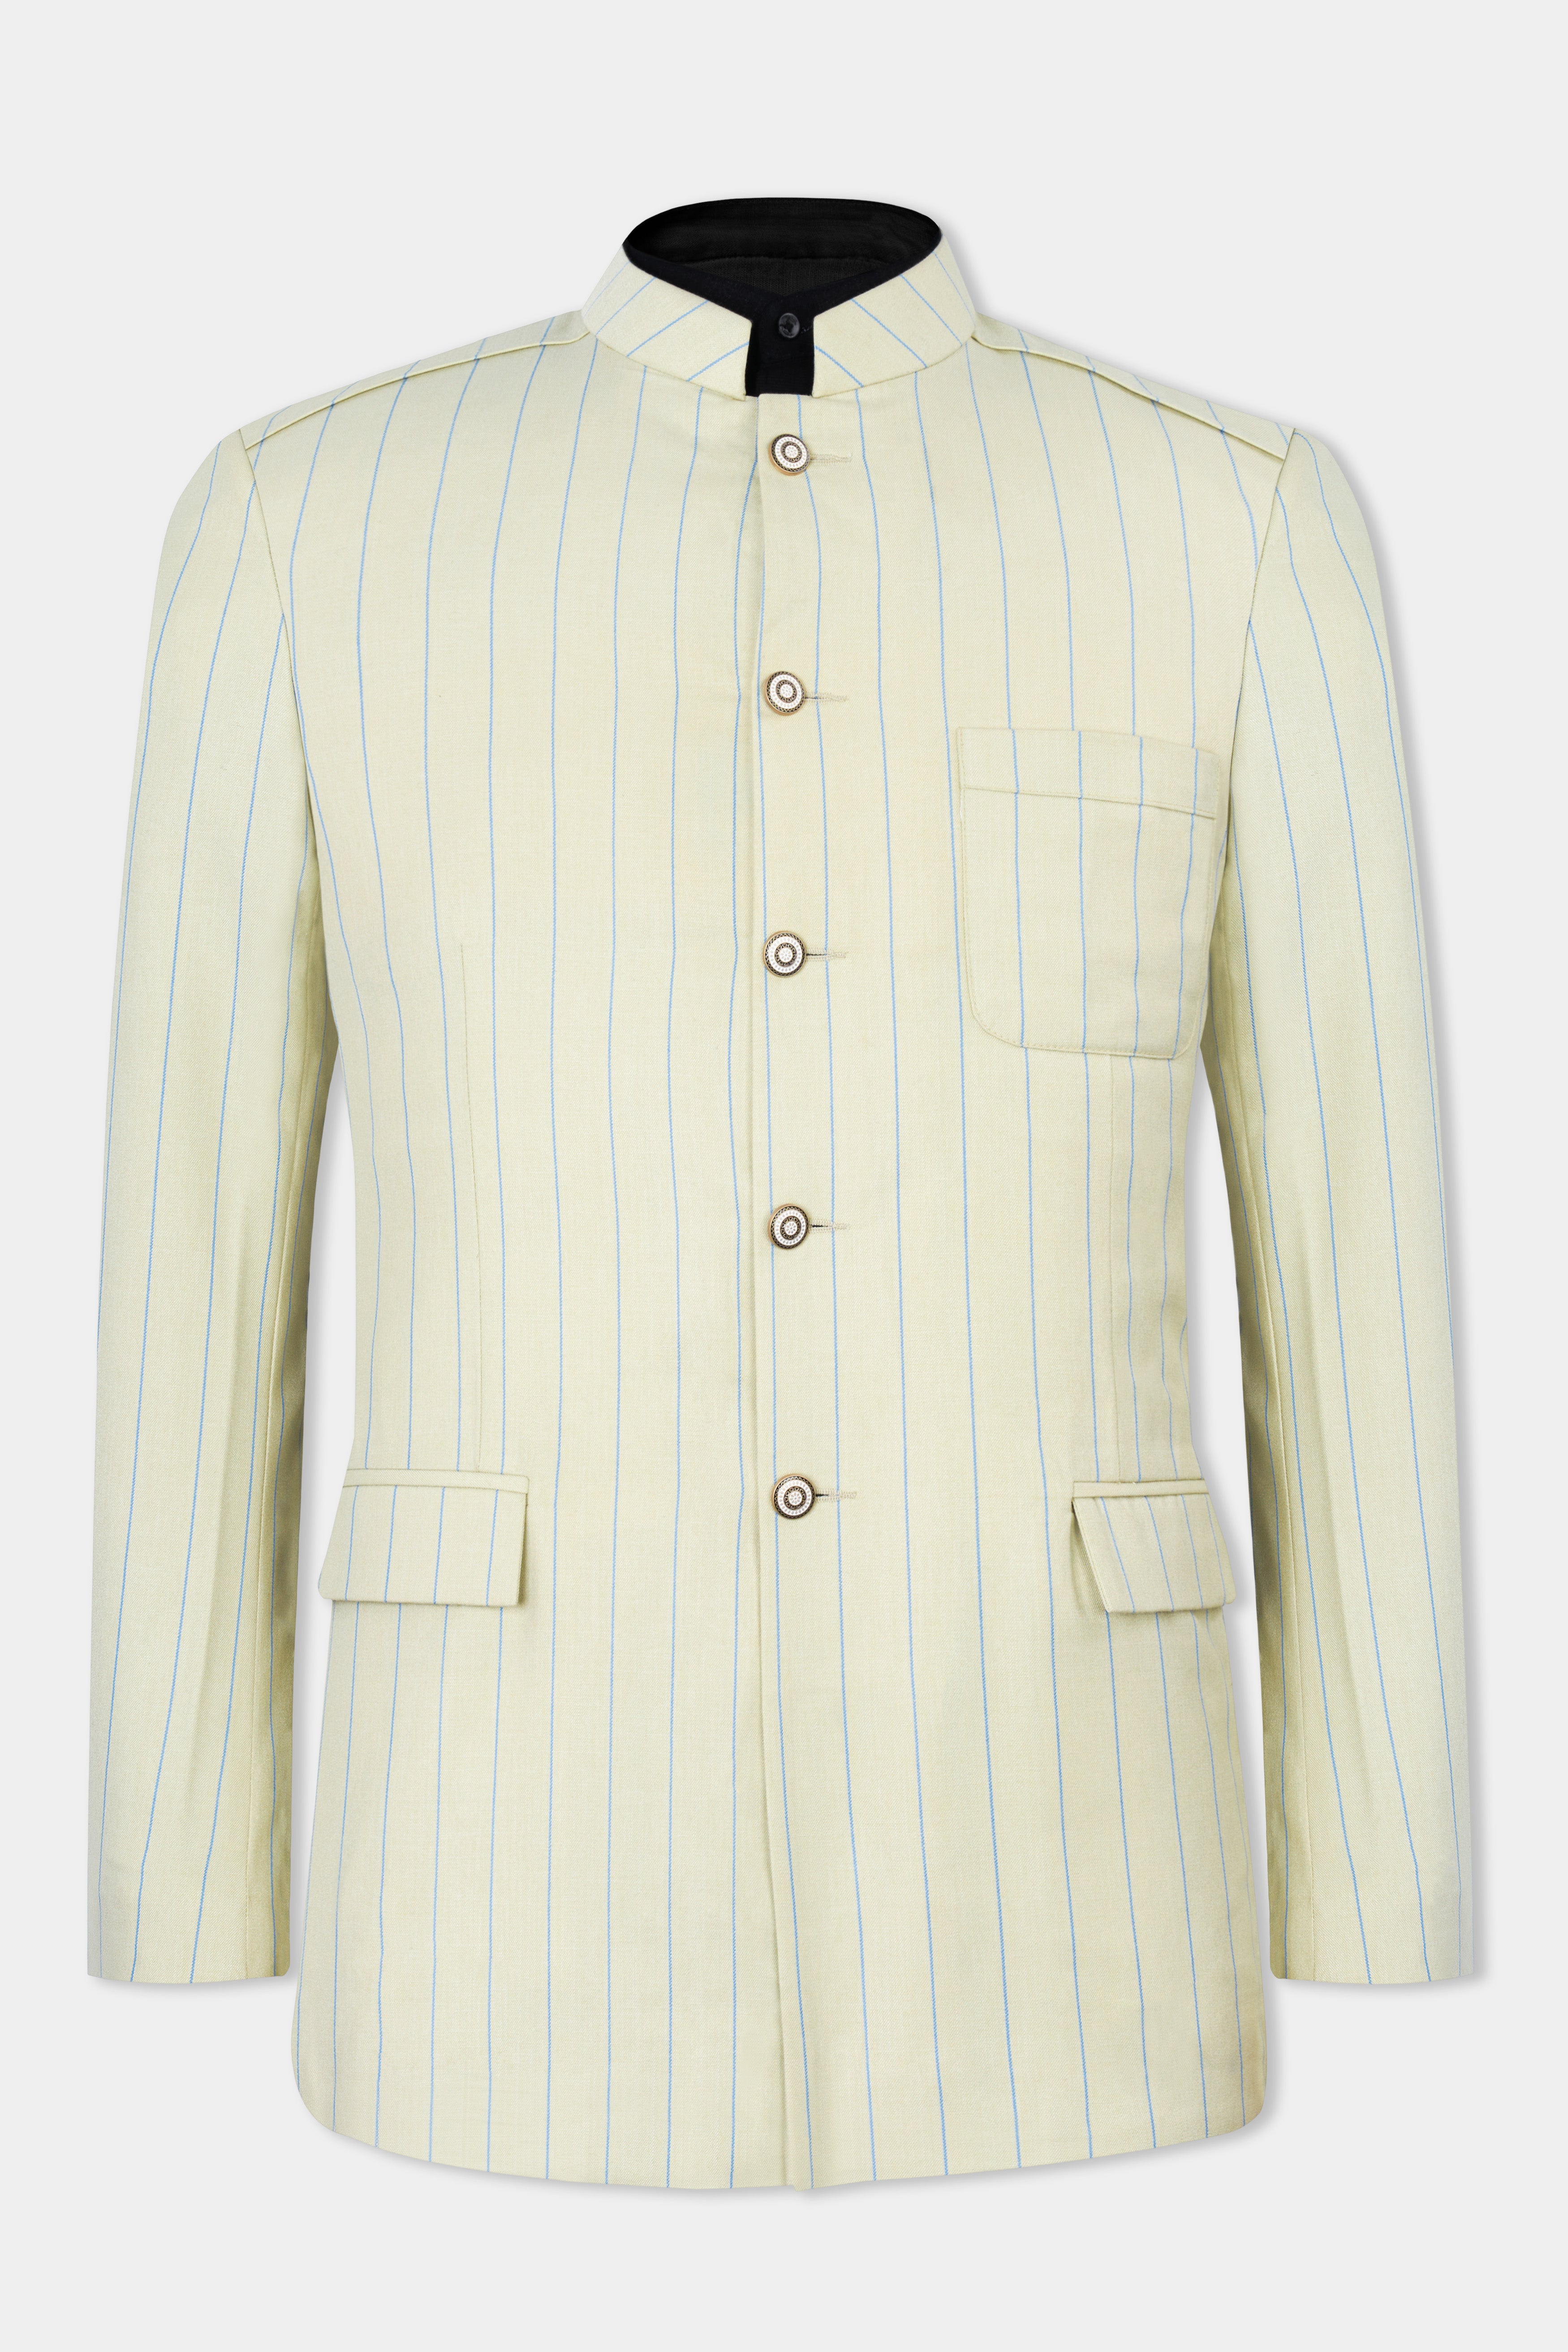 Ivory Cream with Celestial Blue Striped Wool Rich Bandhgala Suit ST2877-BG-D430-36,ST2877-BG-D430-38,ST2877-BG-D430-40,ST2877-BG-D430-42,ST2877-BG-D430-44,ST2877-BG-D430-46,ST2877-BG-D430-48,ST2877-BG-D430-50,ST2877-BG-D430-52,ST2877-BG-D430-54,ST2877-BG-D430-56,ST2877-BG-D430-58,ST2877-BG-D430-60